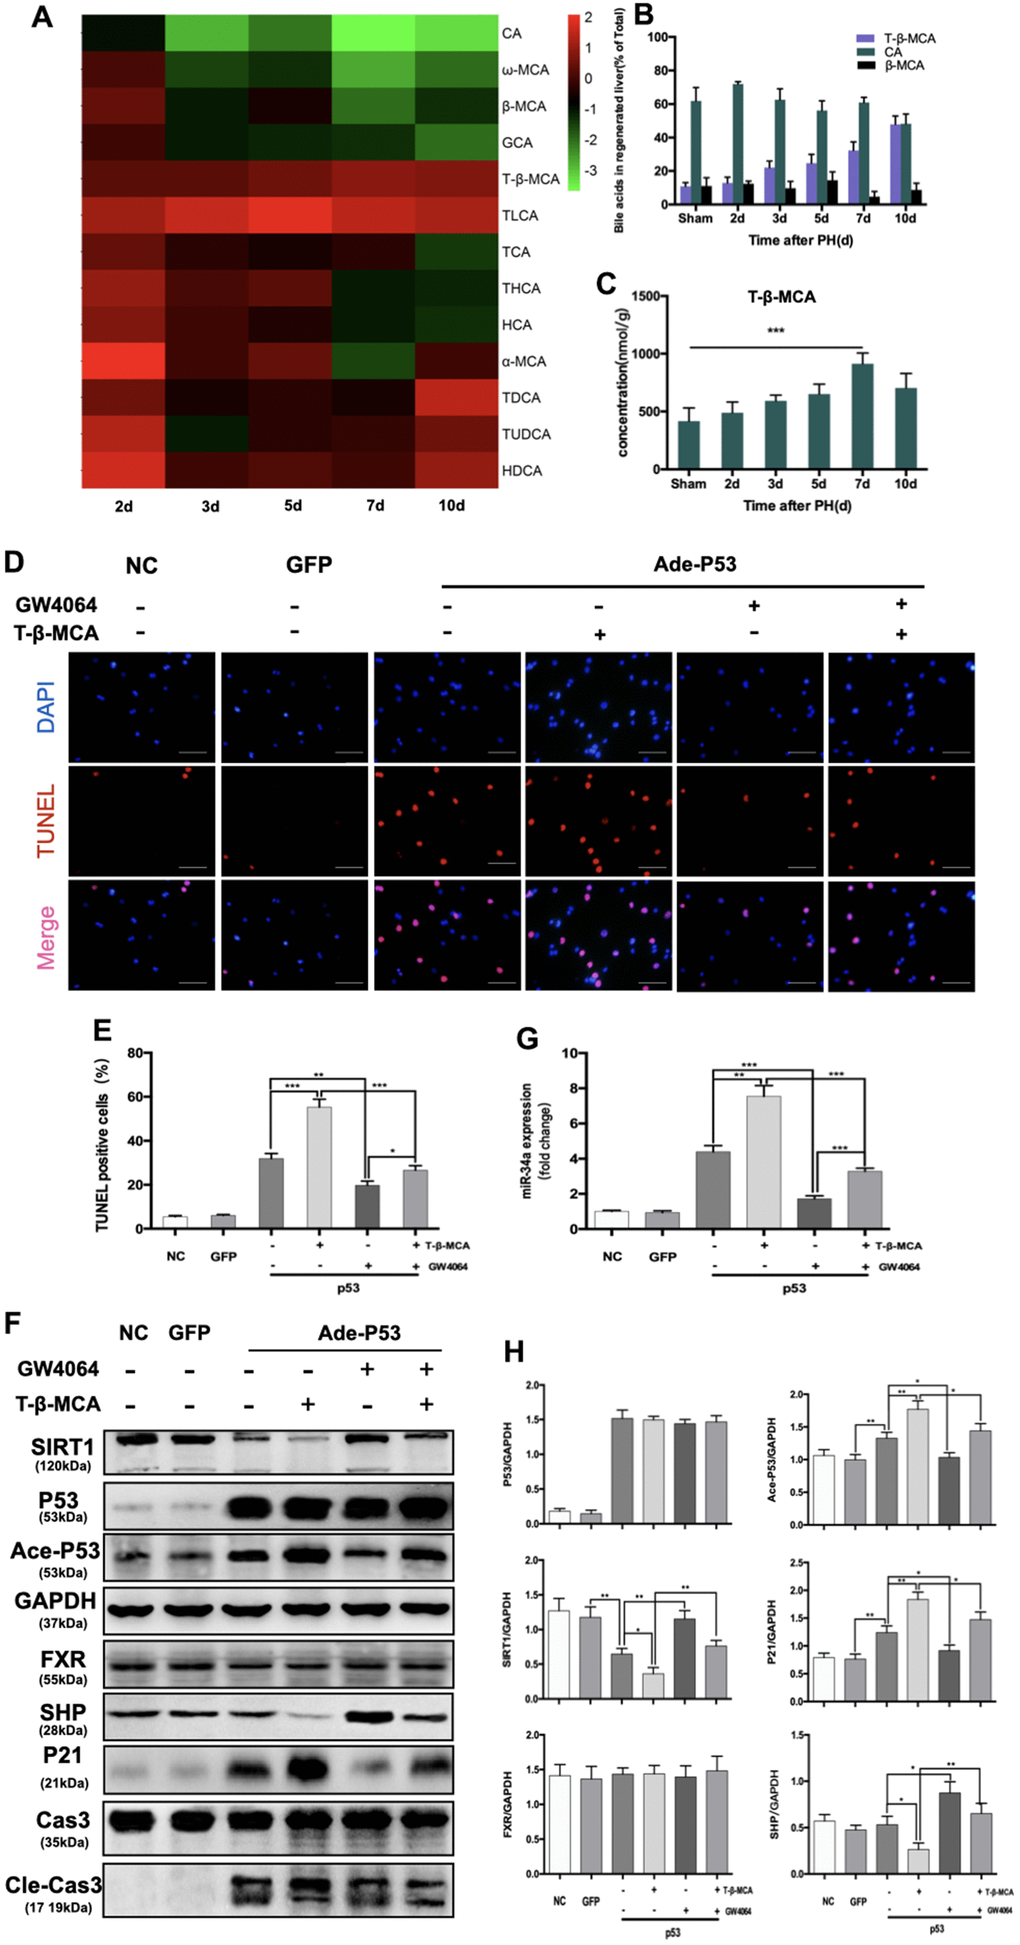 T-β-MCA enhanced the proapoptotic effect of the P53-activated P53/miR-34a/SIRT1 positive feedback loop by suppressing the FXR/SHP signaling pathway in vitro. (A) Heatmap of changed Bas during LR. (B) Percentage of the top 3 BAs at the indicated time points after PH. (C) Concentration of T-β-MCA at the indicated time points after PH. (D) TUNEL staining of primary hepatocytes after knock-in of P53 with/without administration of T-β-MCA and GW4064(magnification: × 400, Scale bars represent 50 μm). (E) Quantification of TUNEL-positive cells after knock-in of P53 with/without administration of T-β-MCA and GW4064. (F) Quantification of hepatic miR-34a expression in mouse primary hepatocytes after knock-in of P53 with/without administration of T-β-MCA and GW4064 by qPCR. (G) Protein expression of P53/miR-34a/SIRT1 positive feedback loop genes and FXR/SHP signaling after knock-in of P53 with/without administration of T-β-MCA and GW4064. Cells were pretreated with/without 100 μM T-β-MCA or 1 μM GW4064 for 12 h. (H) Quantification of P53, Ace-P53, SIRT1, P21, FXR, and SHP protein expression by WB. (ns: p>0.05; *, p